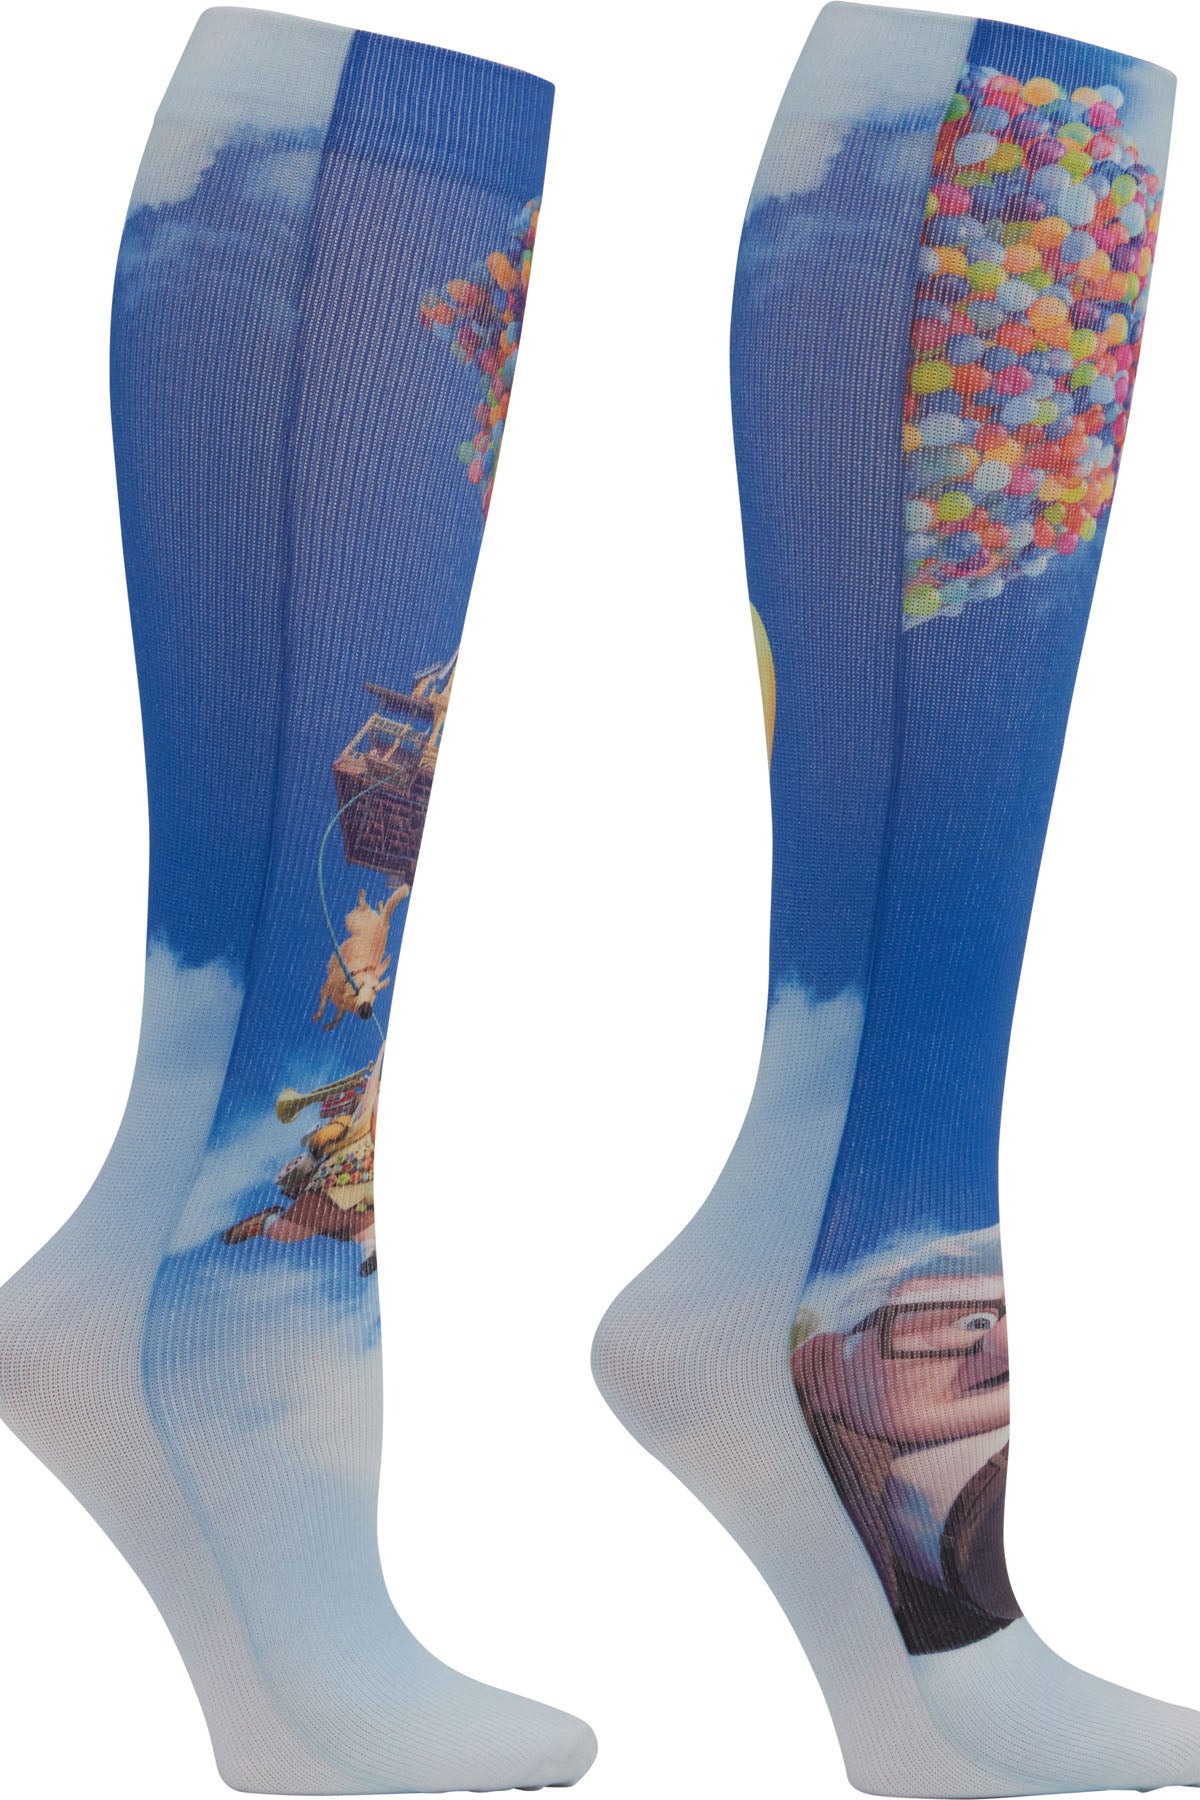 Cherokee Mild Compression Socks Comfort Support 8-15 mmHg in Mr. Fredrickson Pattern at Parker's Clothing and Shoes.